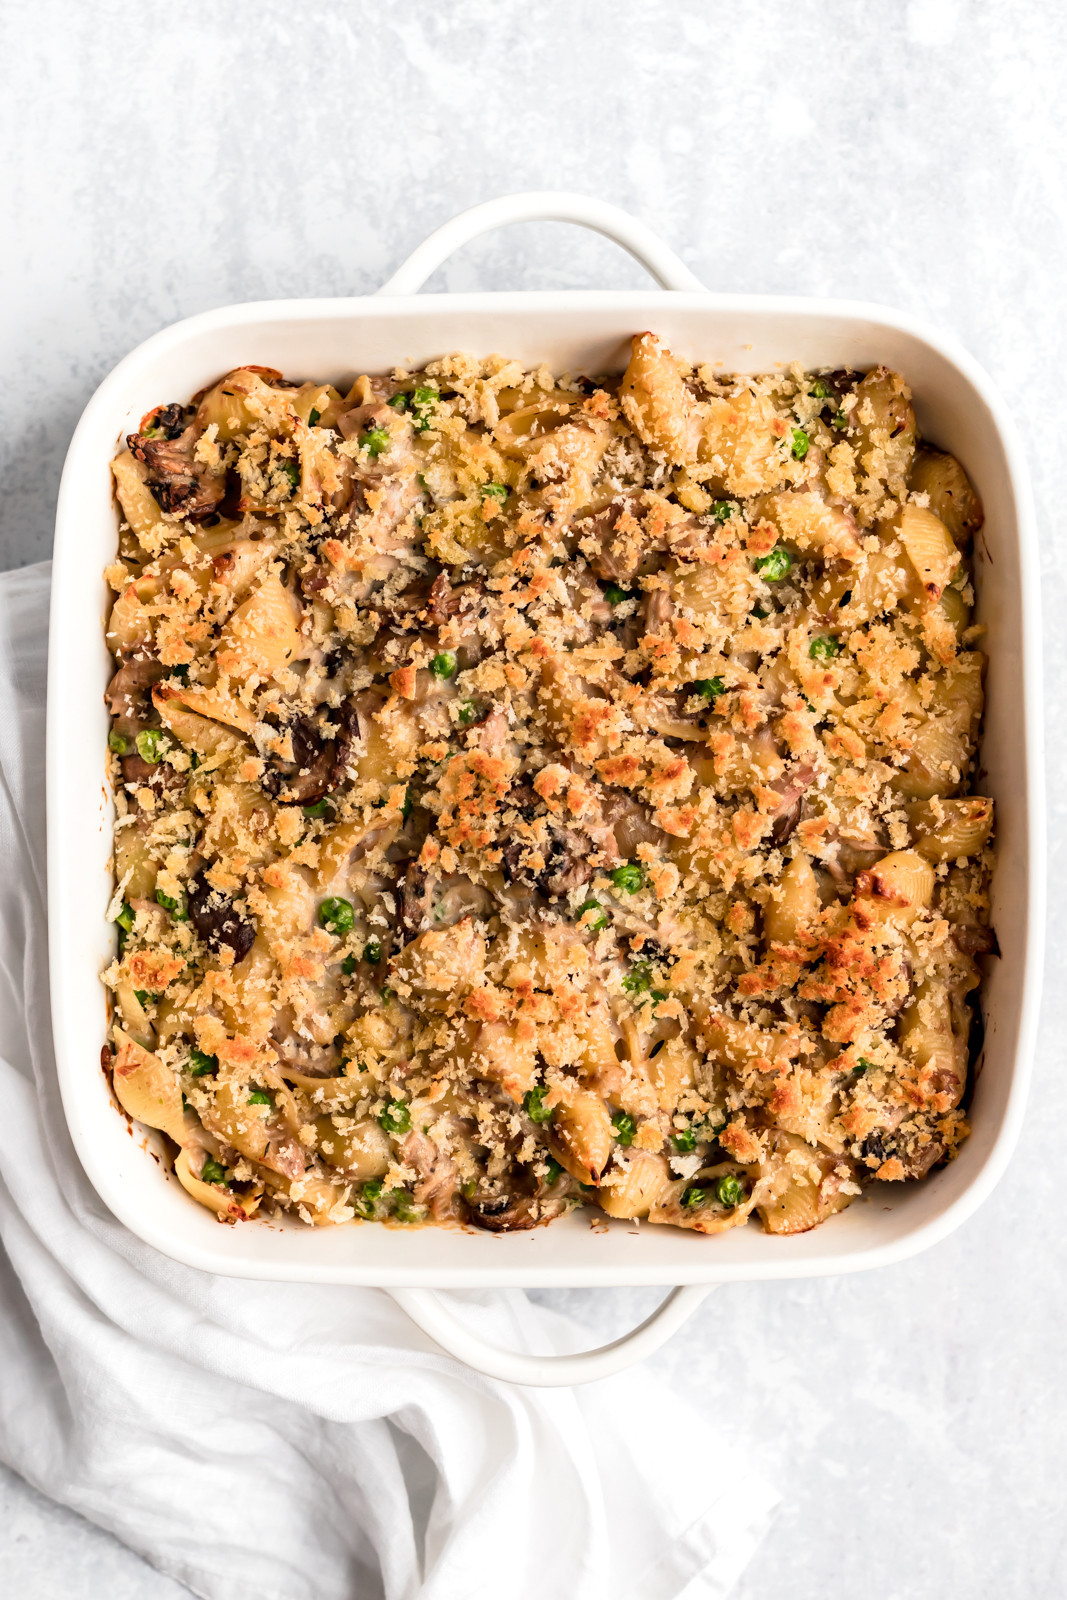 Tuna Noodle Casserole From Scratch
 Healthy Tuna Noodle Casserole from scratch